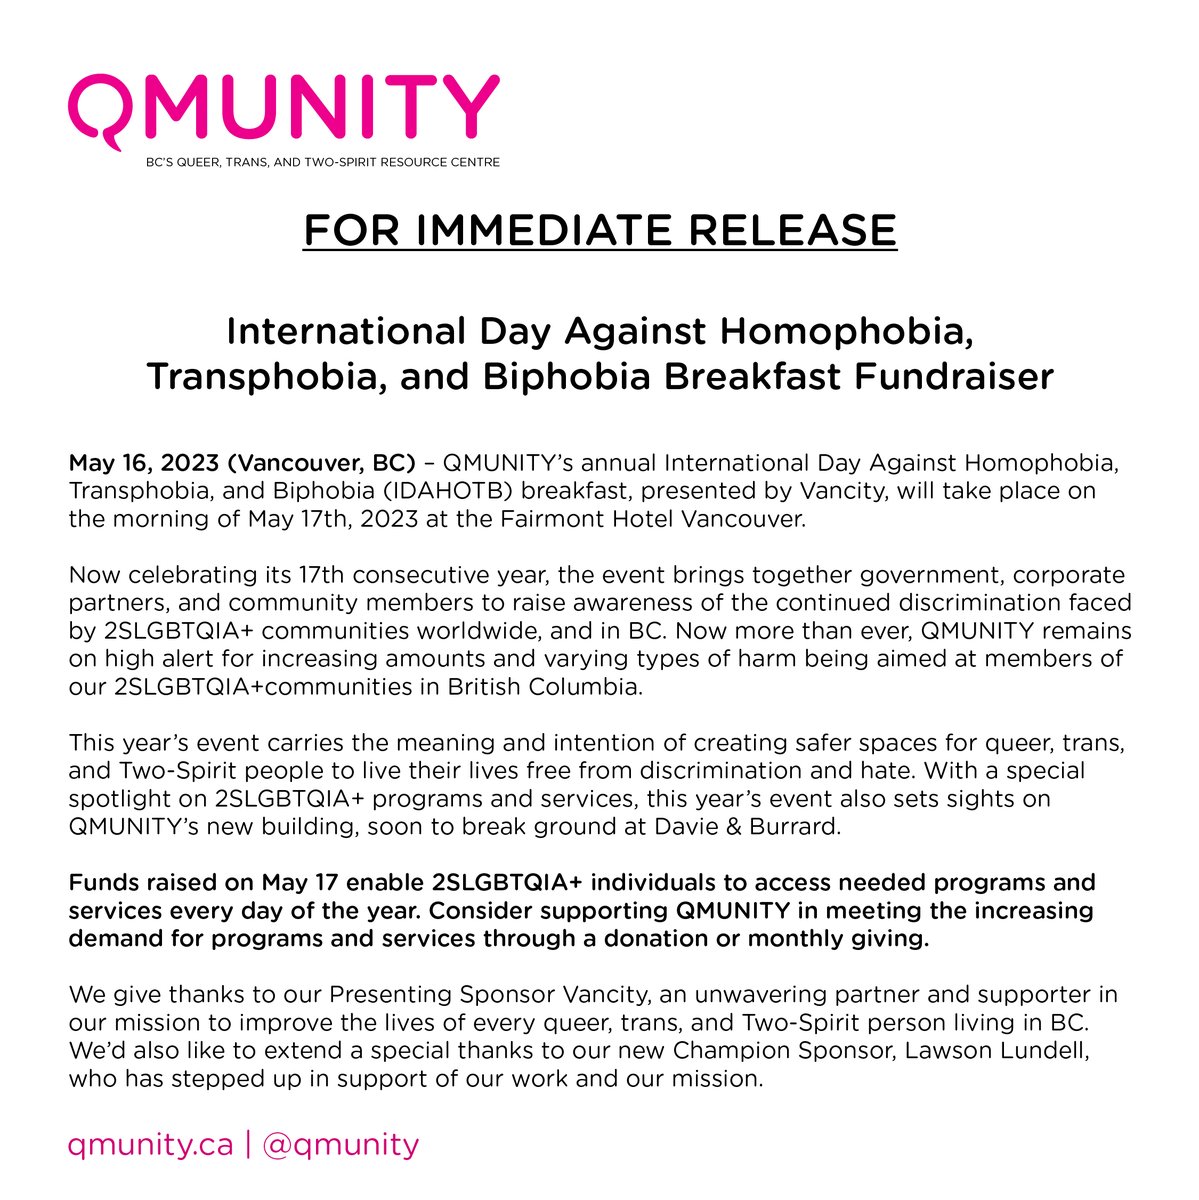 QMUNITY's Press Release for International Day Against Homophobia, Transphobia, & Biphobia May 17th, 2023. For media enquiries & additional information, please contact Michael Robach (he/him), Director of Development at michael.robach@qmunity.ca.